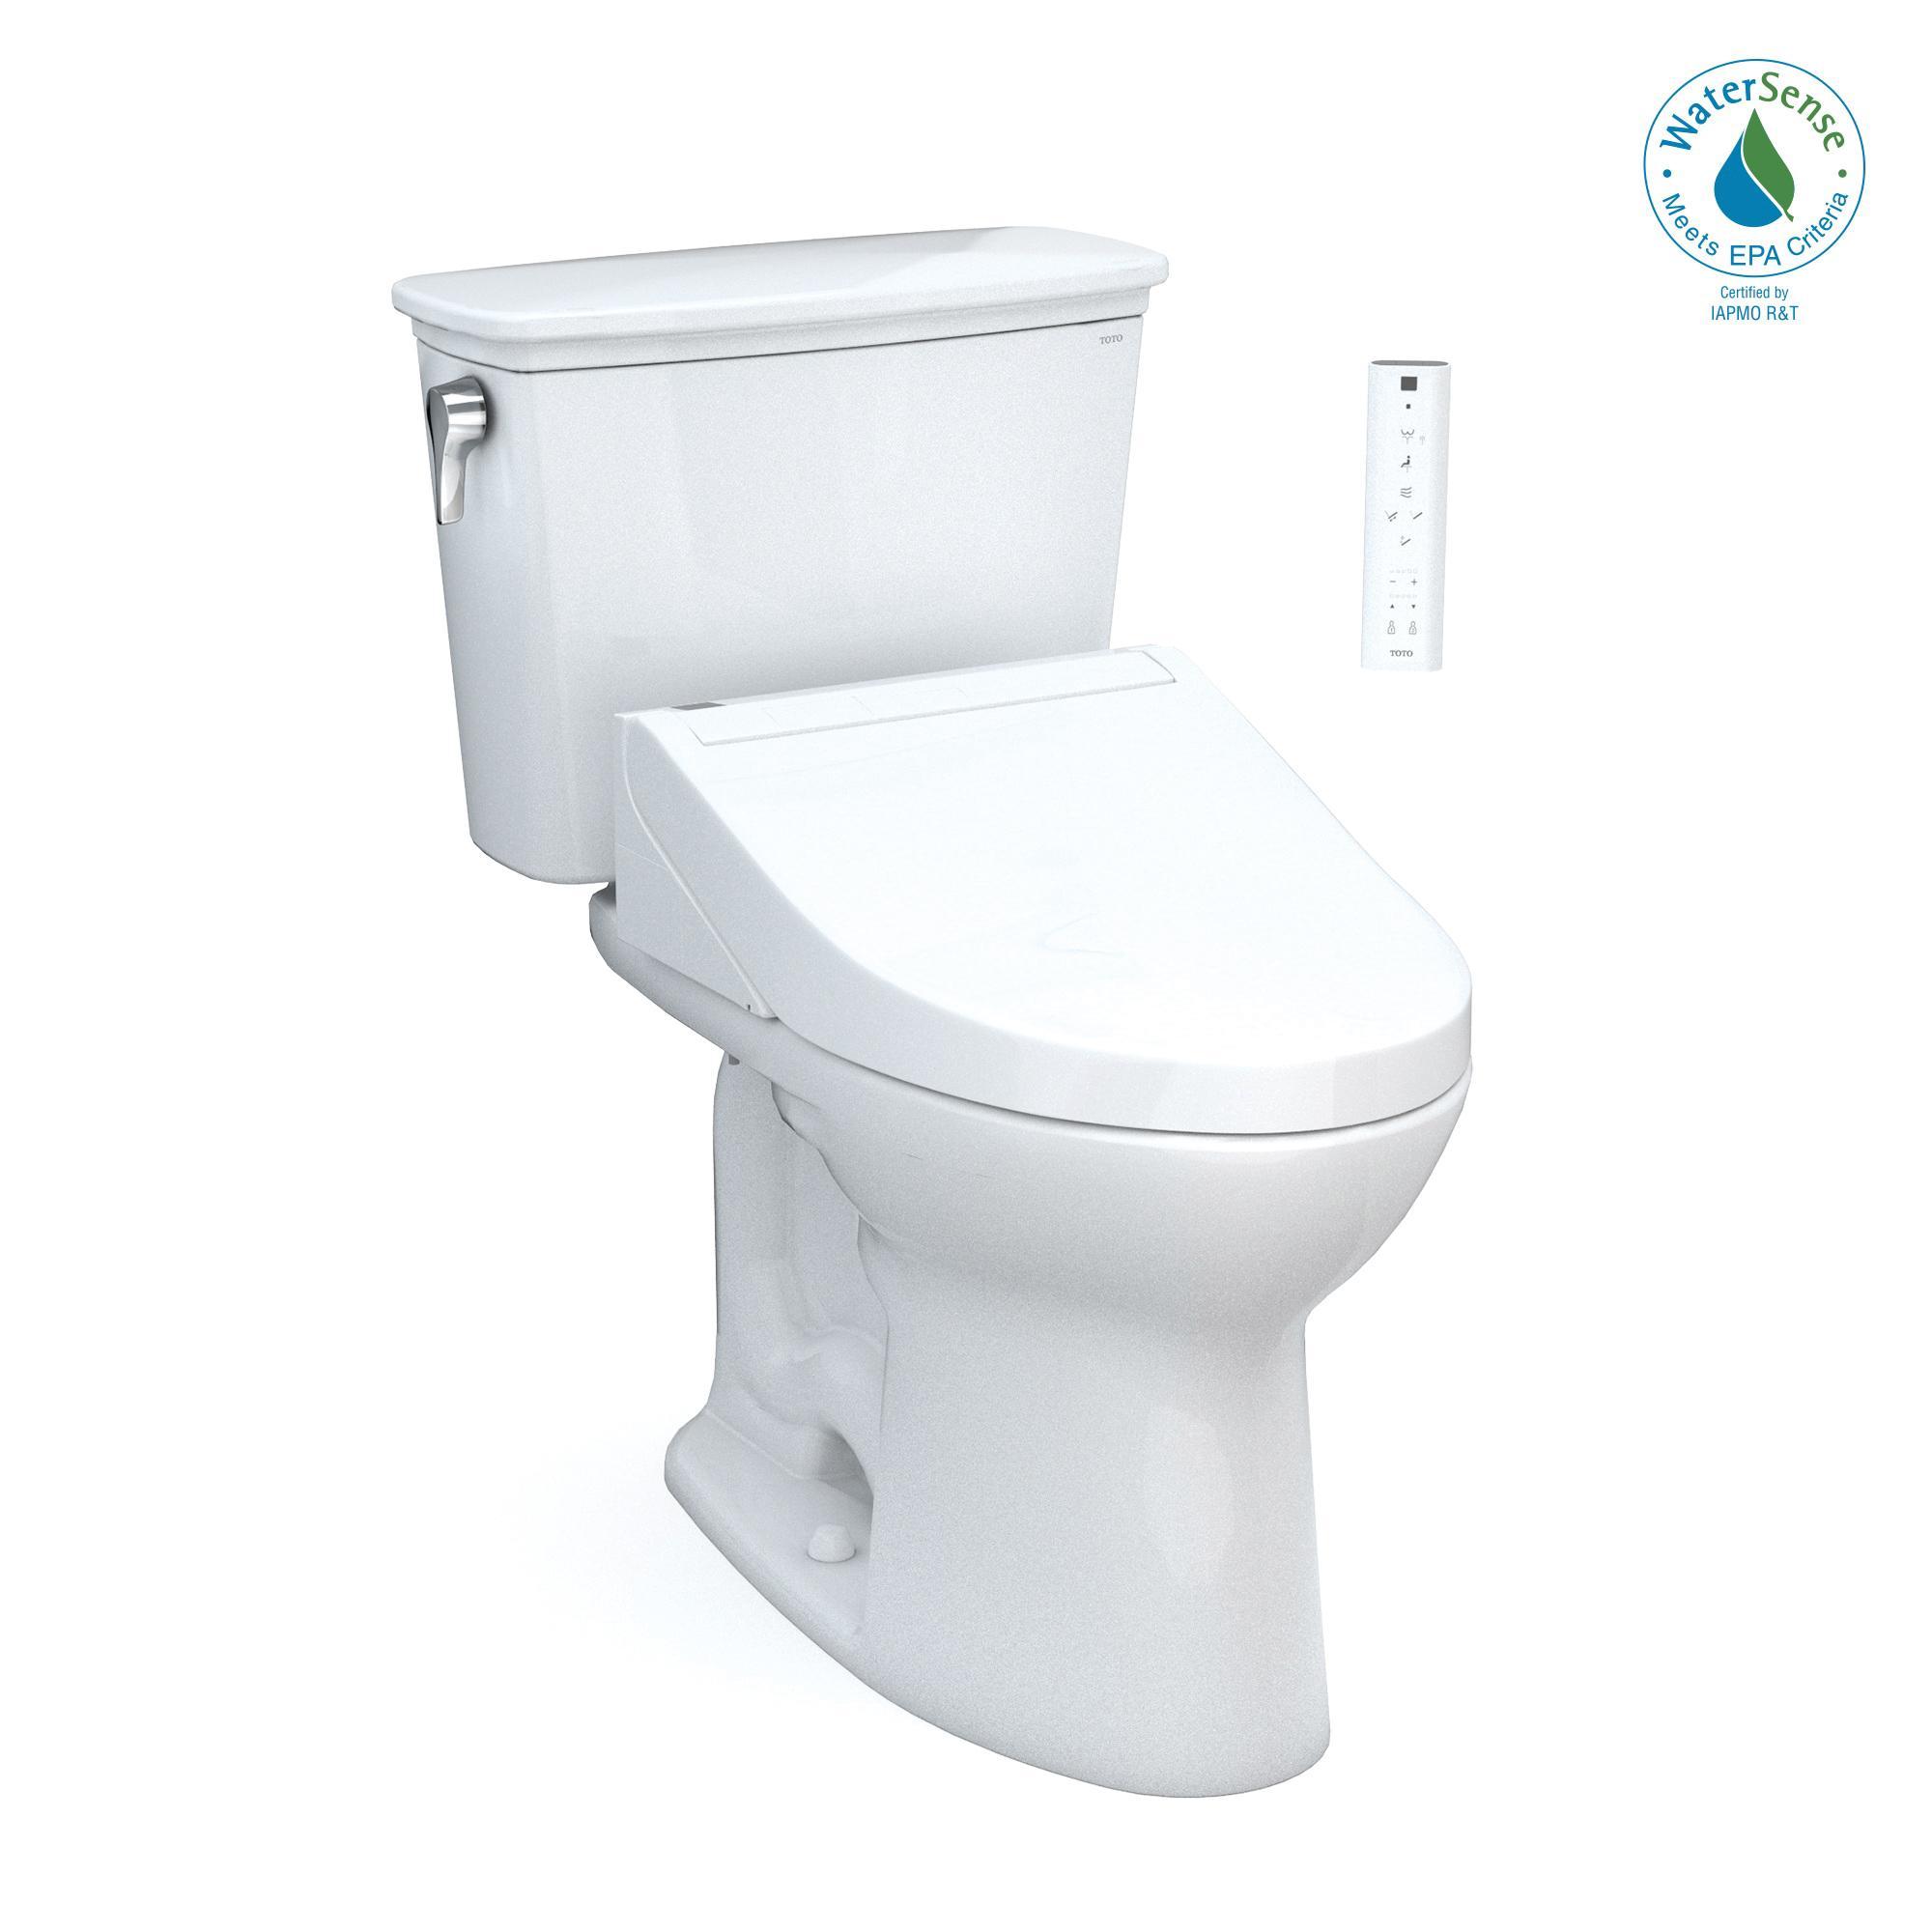 Toto® MW7863084CEFG#01 Universal Height Transitional 2-Piece Toilet With SW3074T40#01/C2 Bidet Seat, Drake®, Elongated Bowl, 16-1/8 in H Rim, 12 in Rough-In, 1.28 gpf, Cotton White, Import